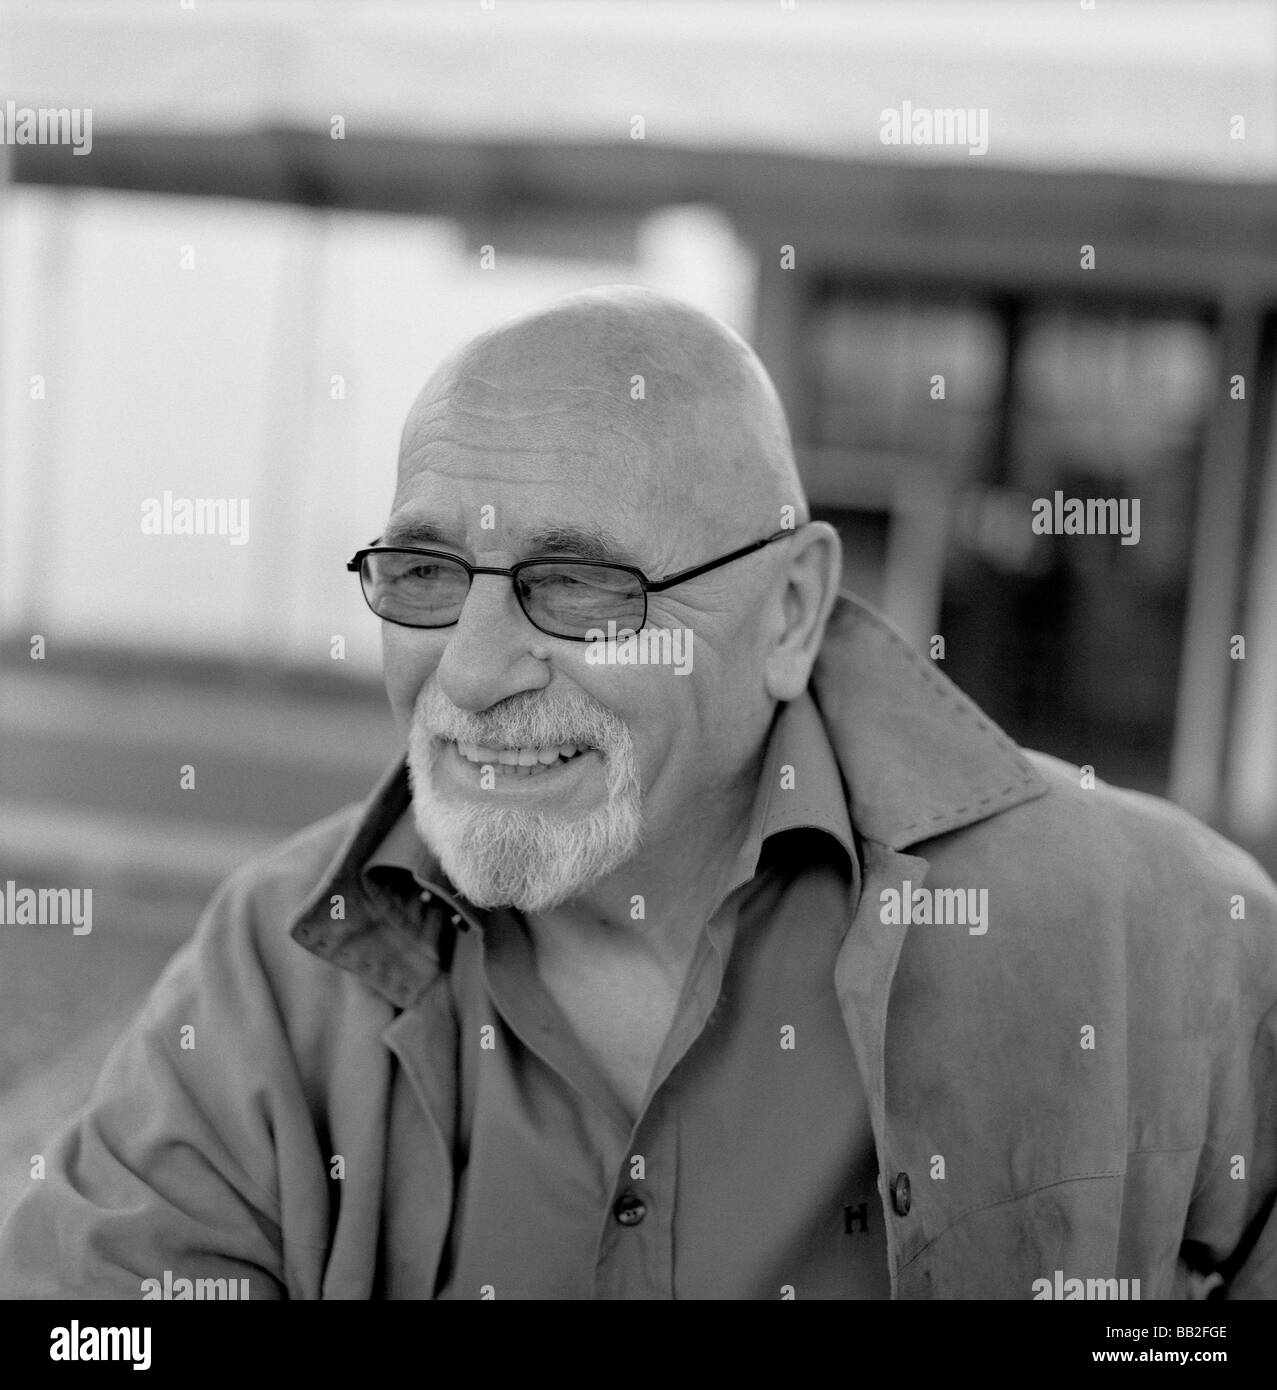 British childrens author Brian Jacques at the Hay Festival Hay-on-Wye Wales UK Stock Photo